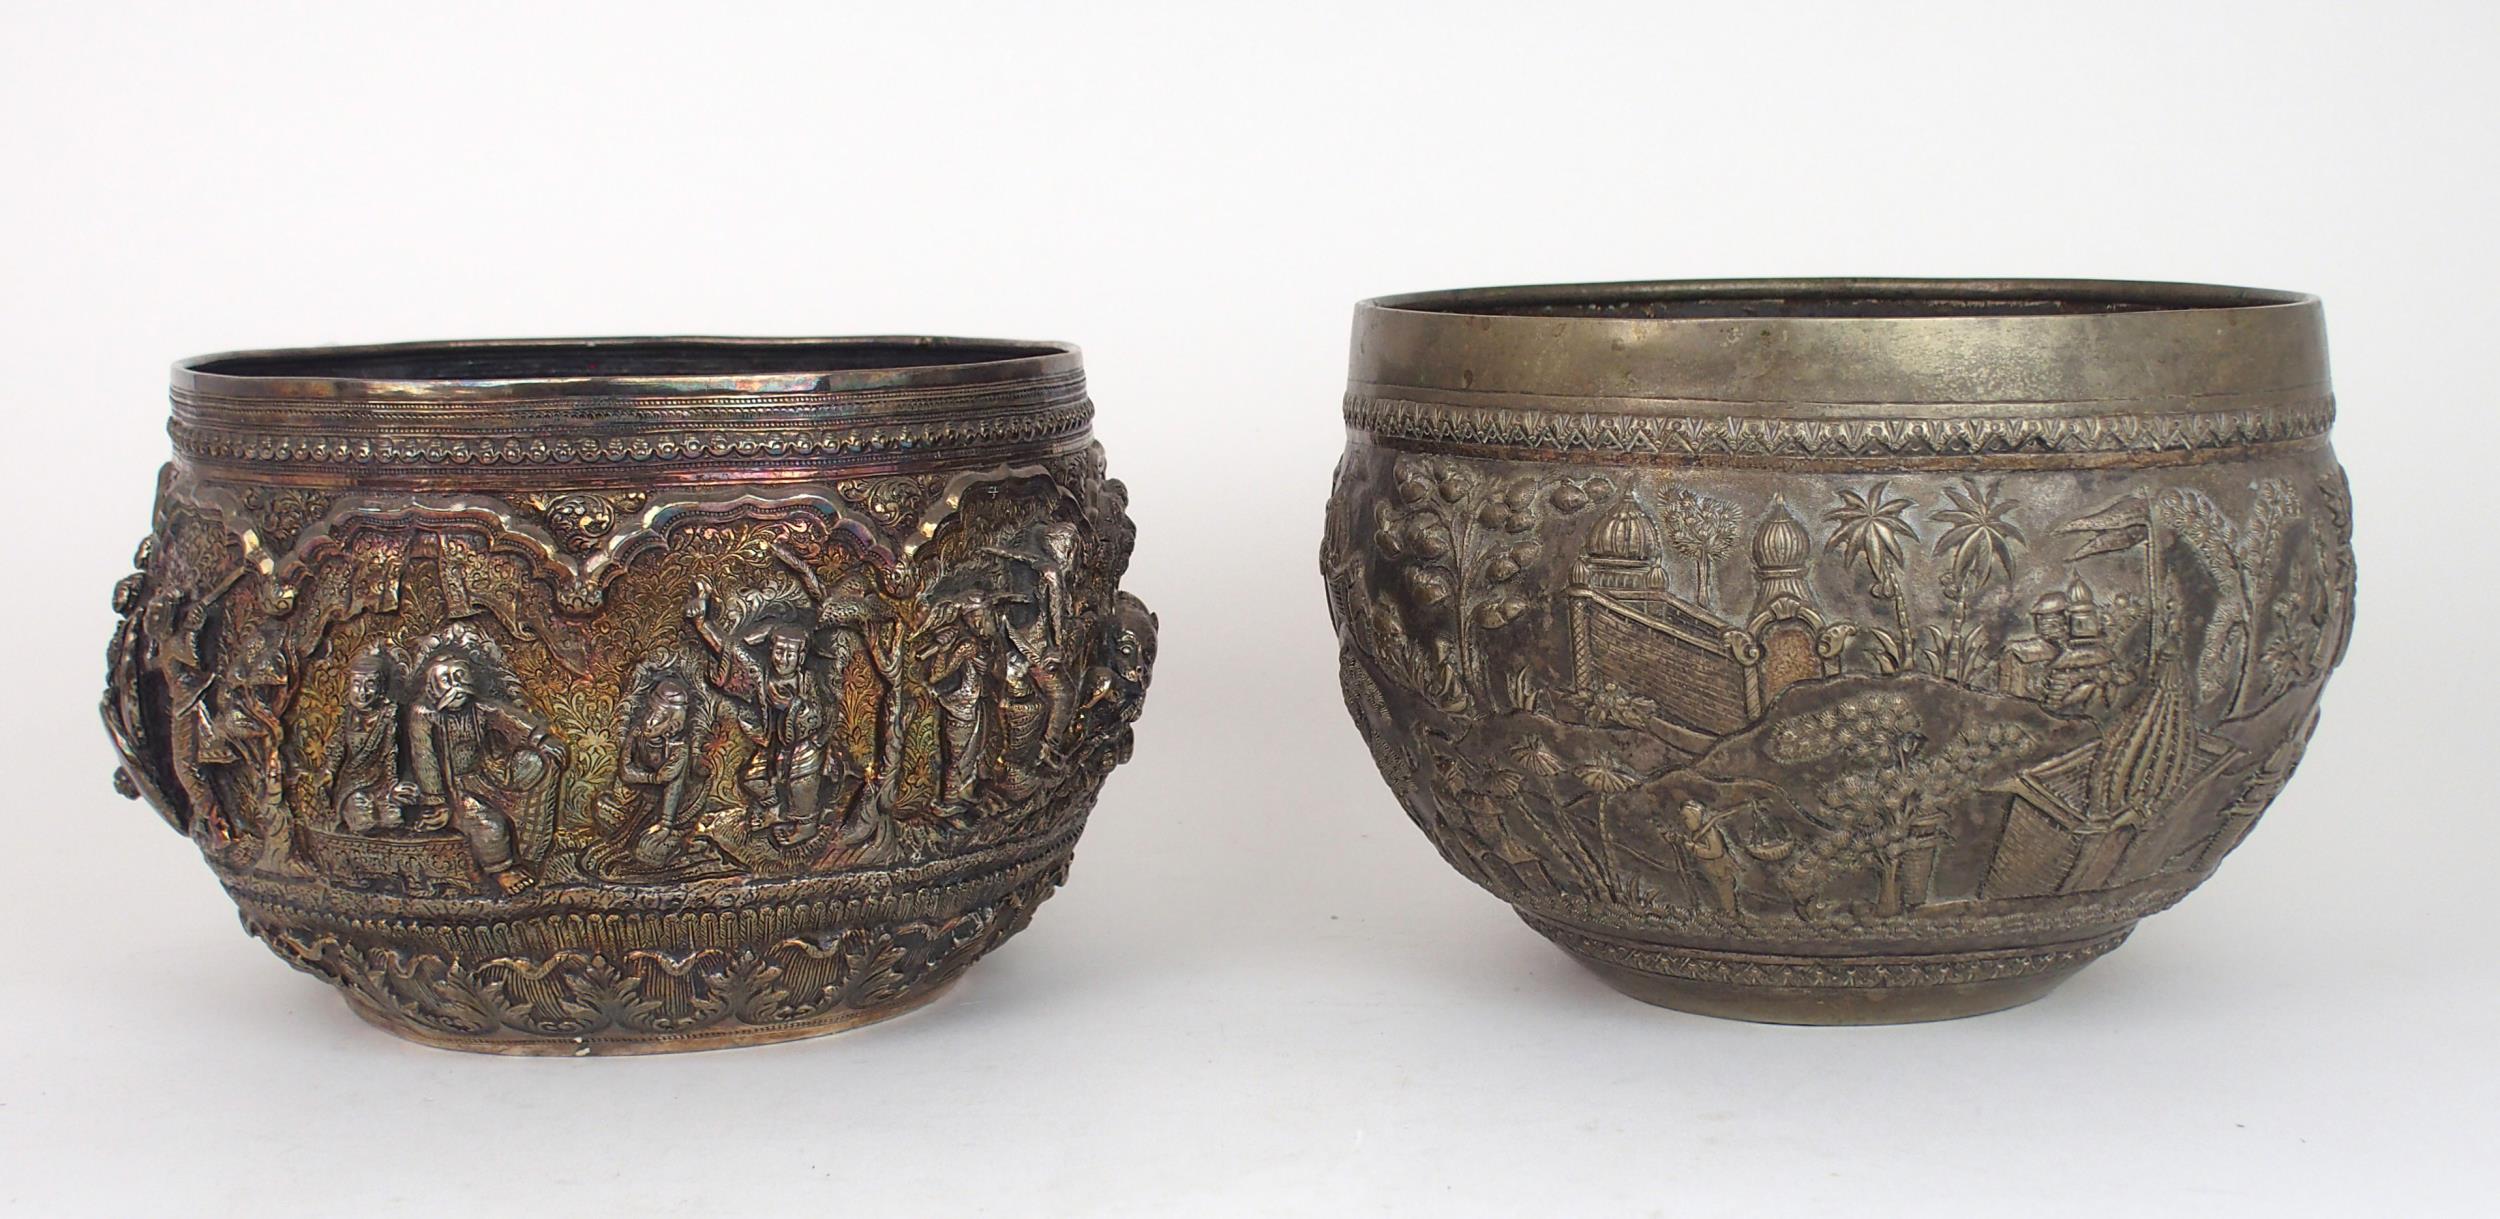 A BURMESE SILVER BOWL of rounded form, with profusely embossed and repousse work of villagers,